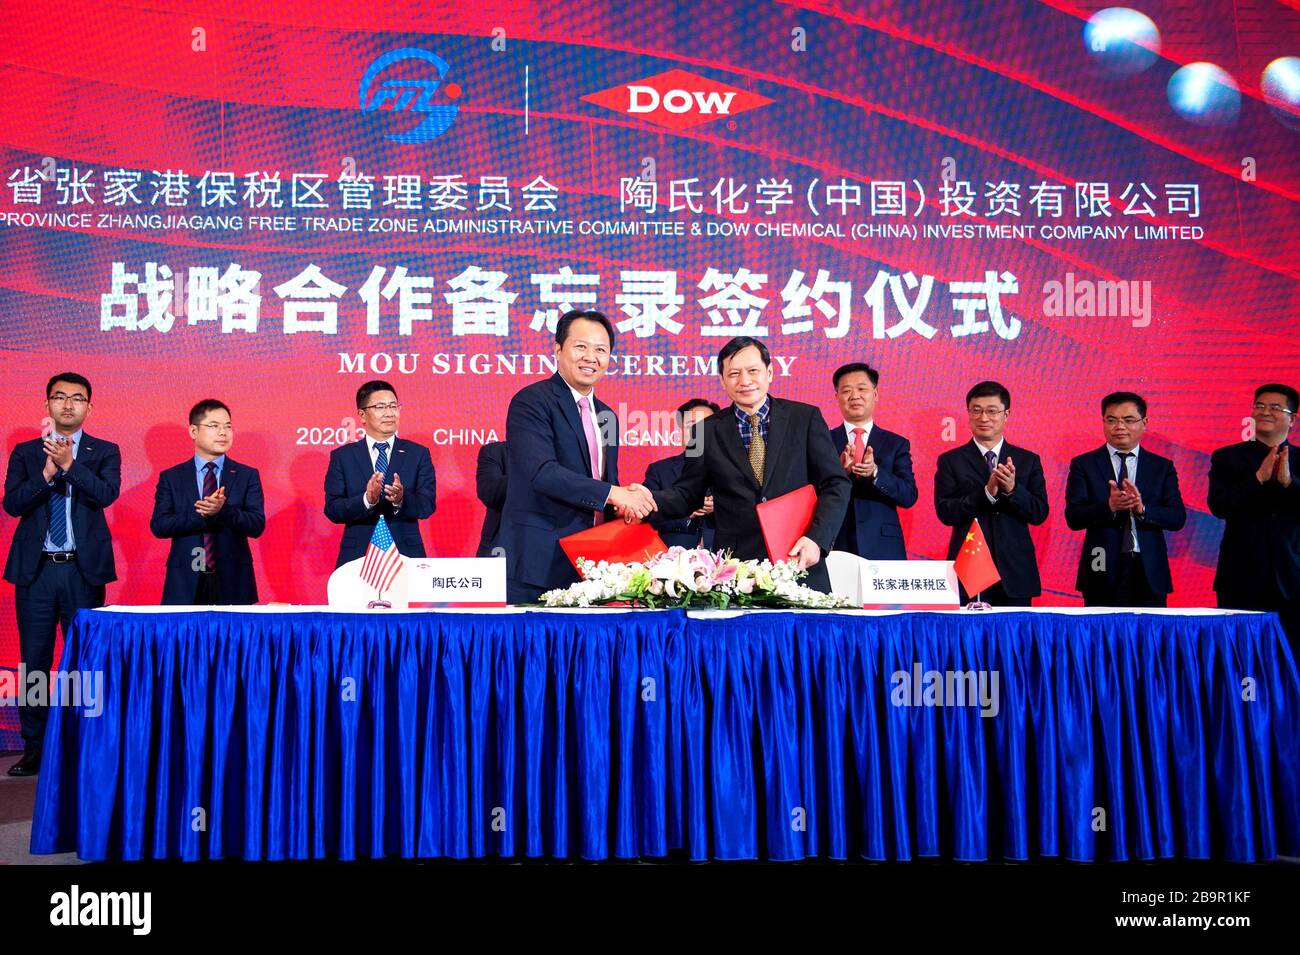 Beijing, China. 25th Mar, 2020. Photo taken on March 23, 2020 show the Memorandum of Understanding (MoU) signing ceremony between Zhangjiagang Free Trade Zone Administrative Committee and Dow Chemical (China) Investment Company Limited in Zhangjiagang, east China's Jiangsu Province. TO GO WITH XINHUA HEADLINES OF MARCH 25, 2020. Credit: Xinhua/Alamy Live News Stock Photo